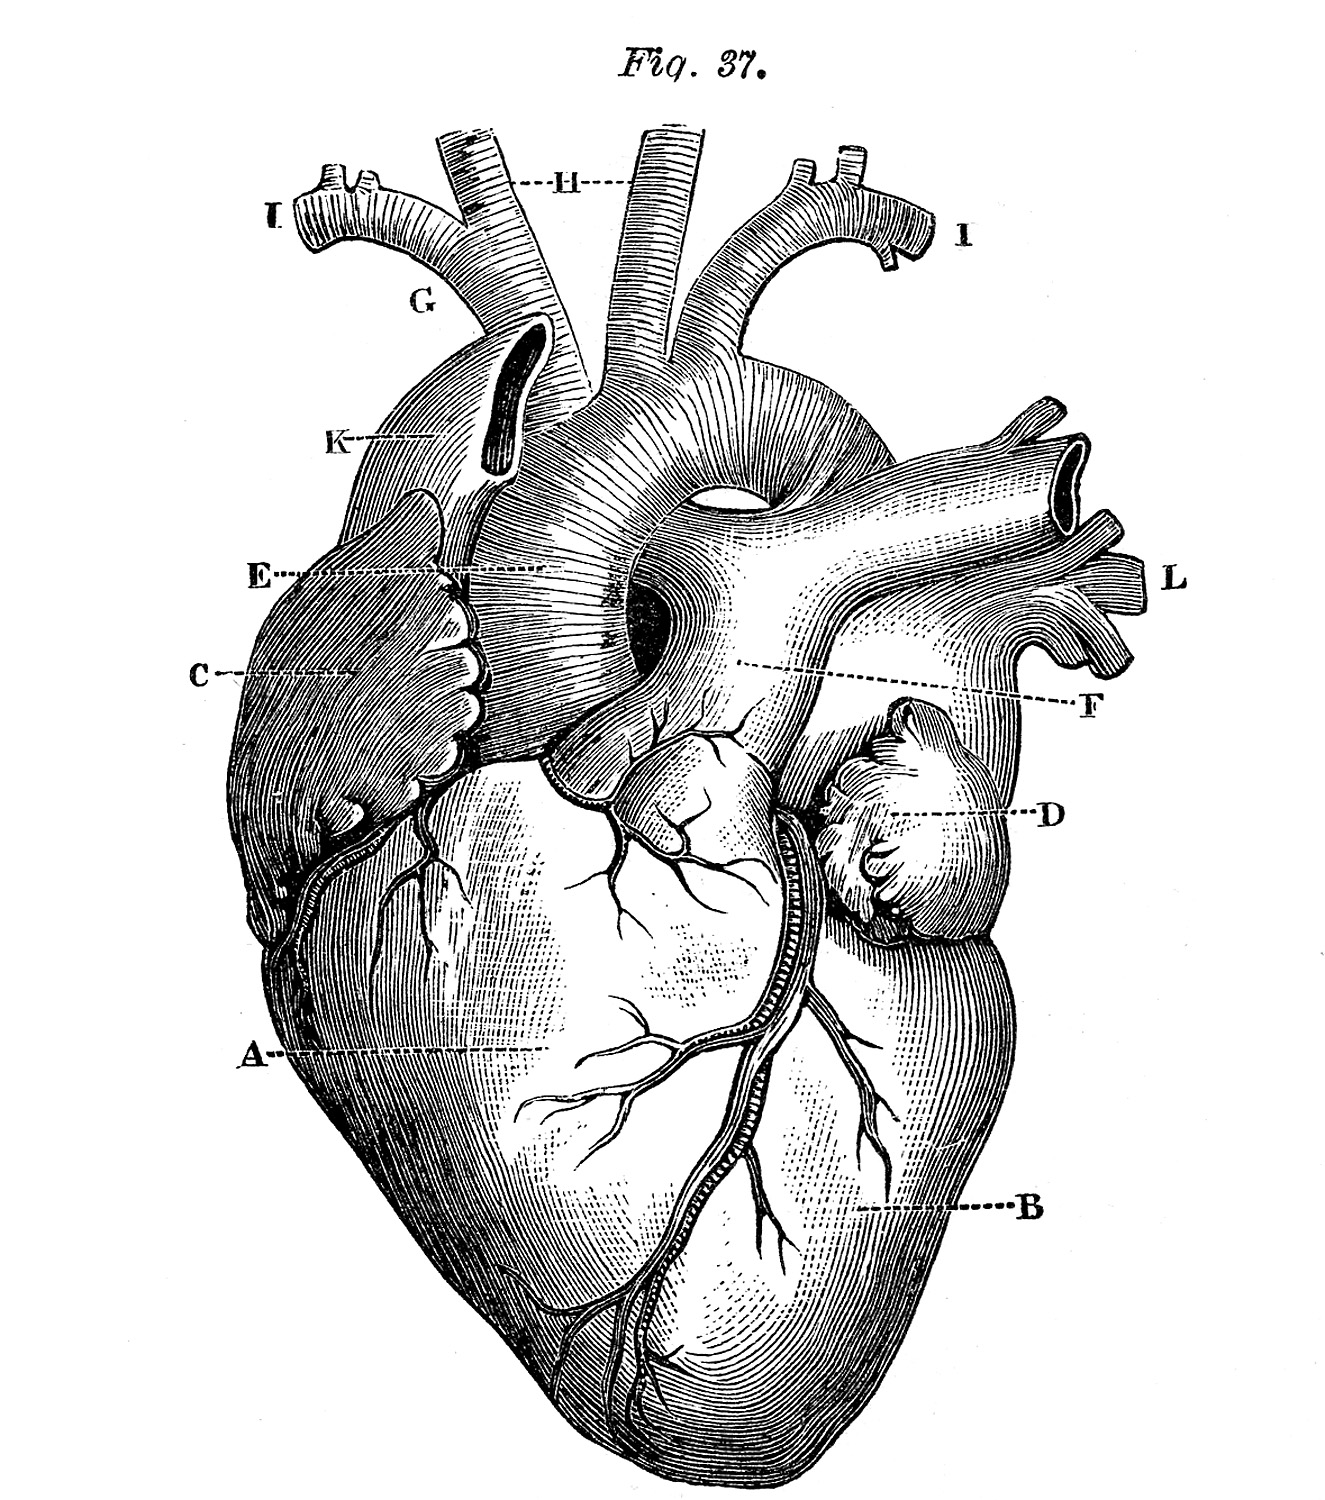 Vintage Heart Image Drawing